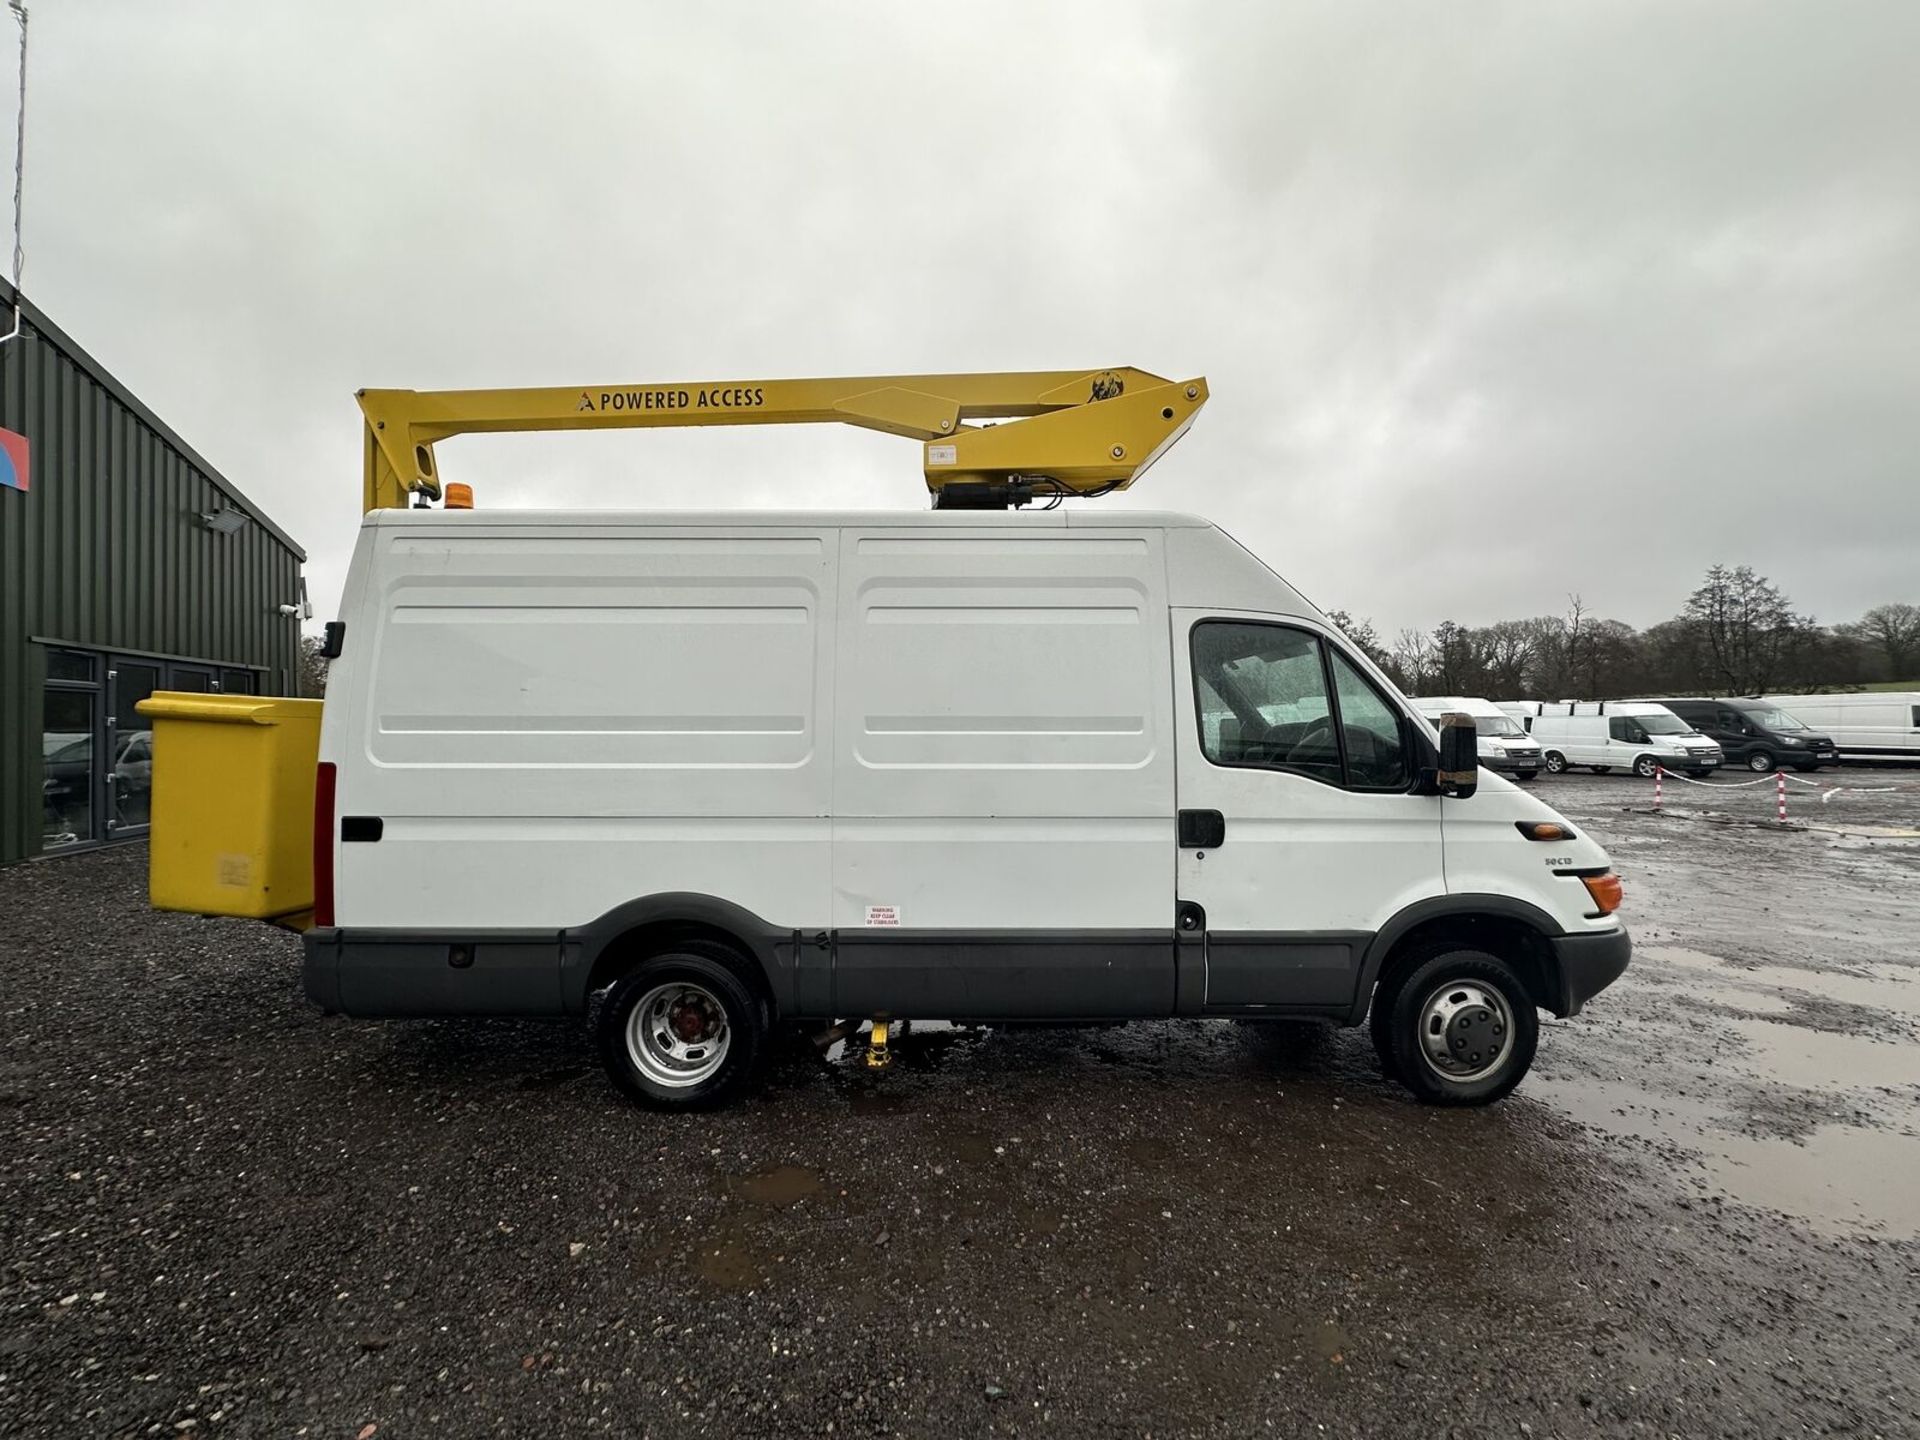 2005 IVECO DAILY CHERRY PICKER - POTENTIAL WIRING FAULT >>--NO VAT ON HAMMER--<<